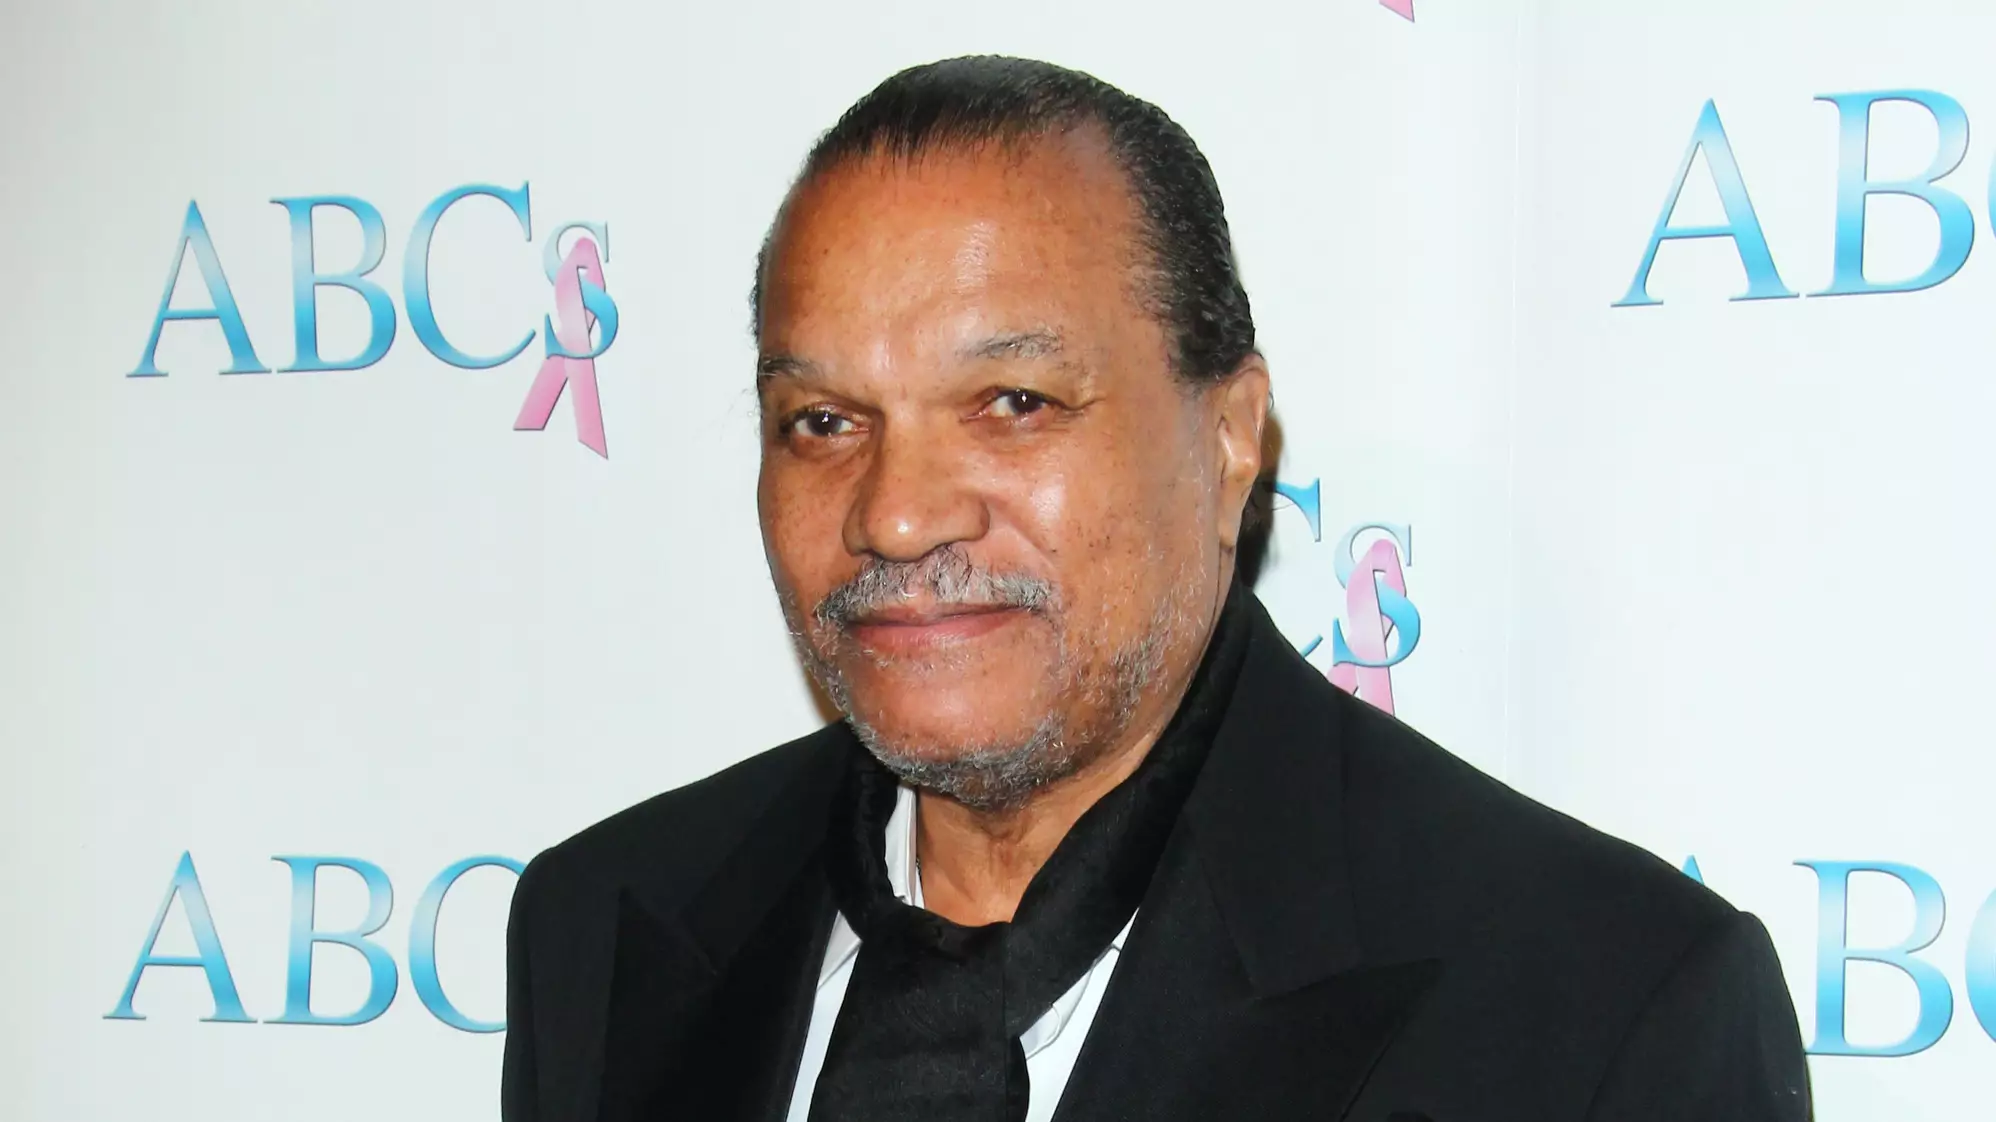 Star Wars Actor Billy Dee Williams Identifies With Both 'Himself' And 'Herself' Pronouns